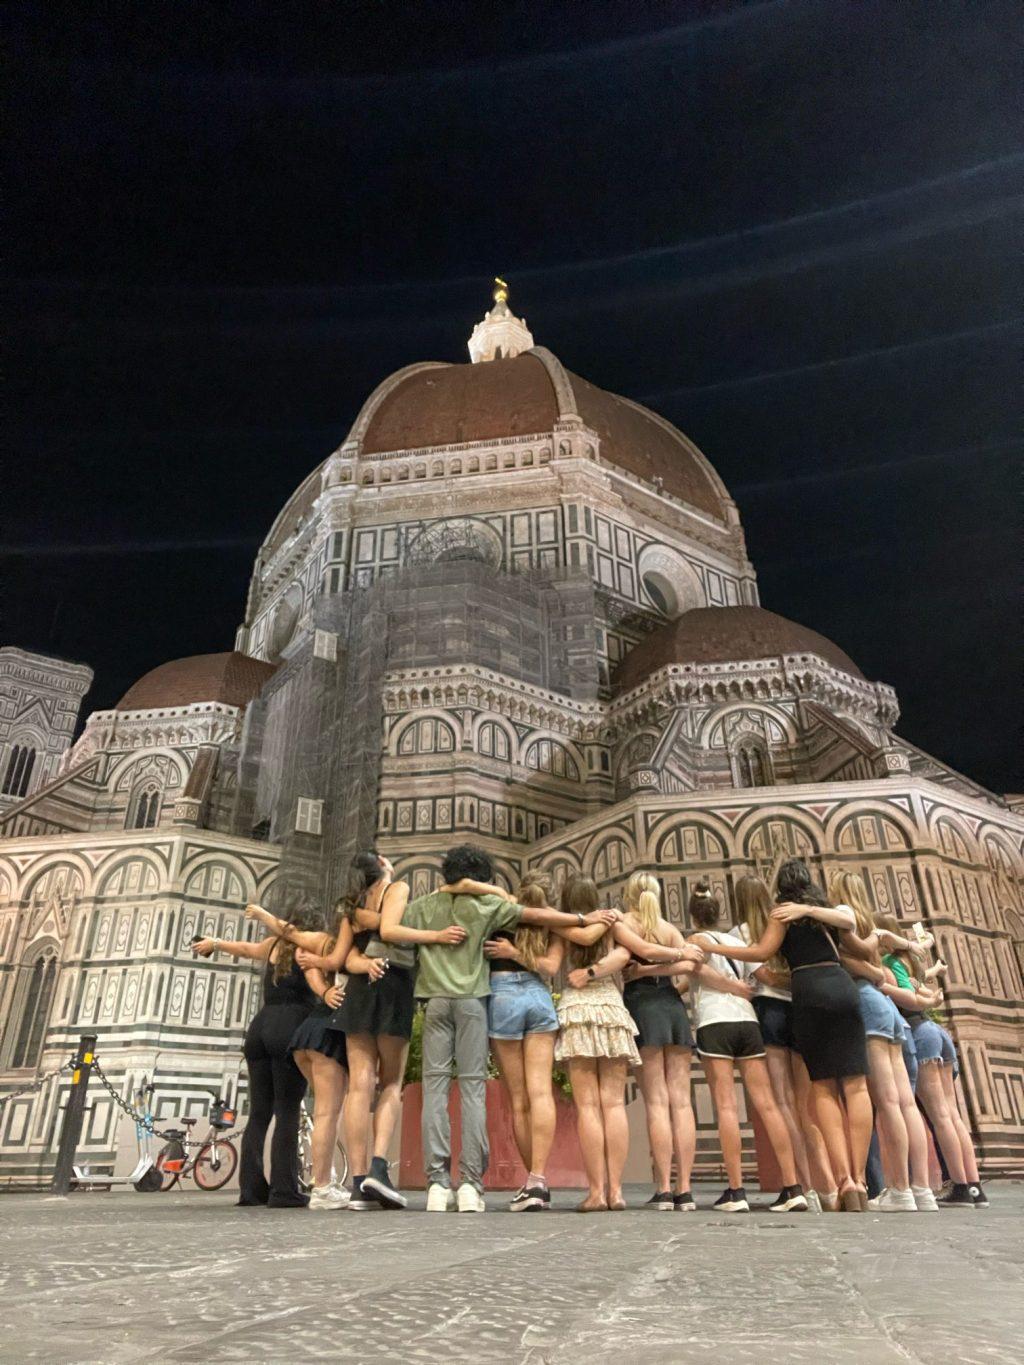 Florence summer 2023 students bidding the Duomo farewell in Florence, Italy on June 30. In the last few hours before a 4 a.m. departure, students gave a bittersweet goodbye to the landmark cathedral.